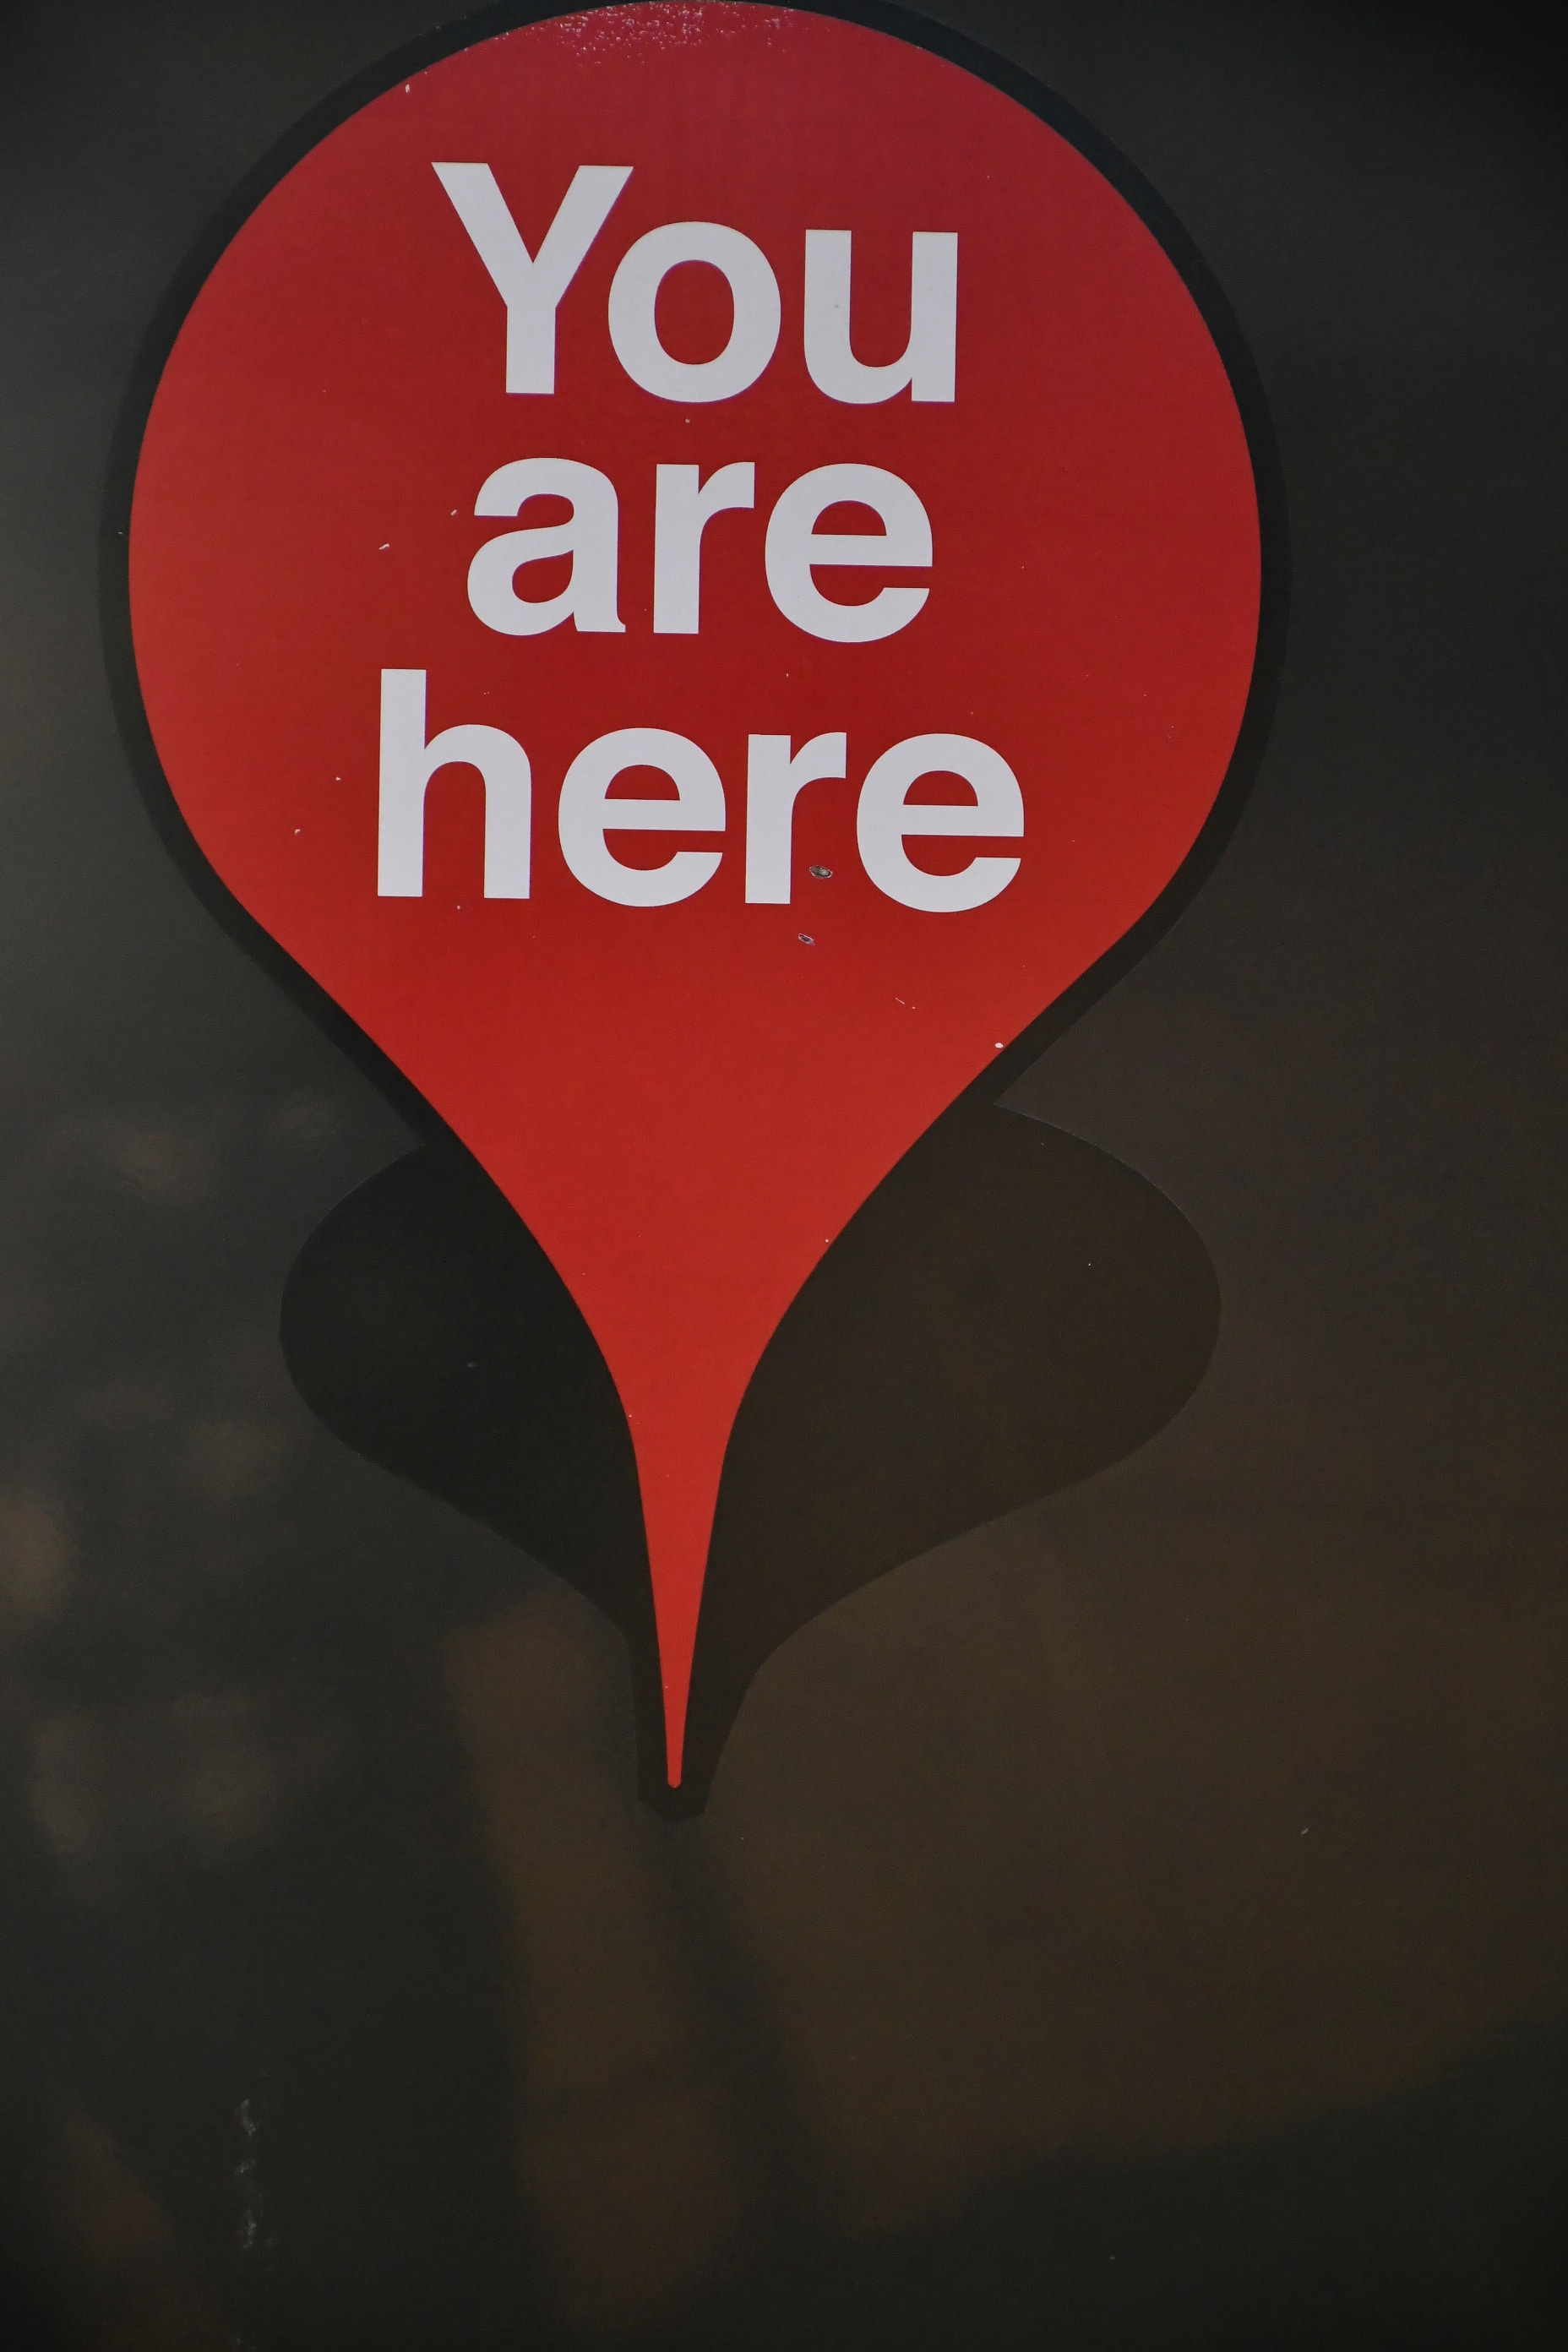 red map pin says "you are here"